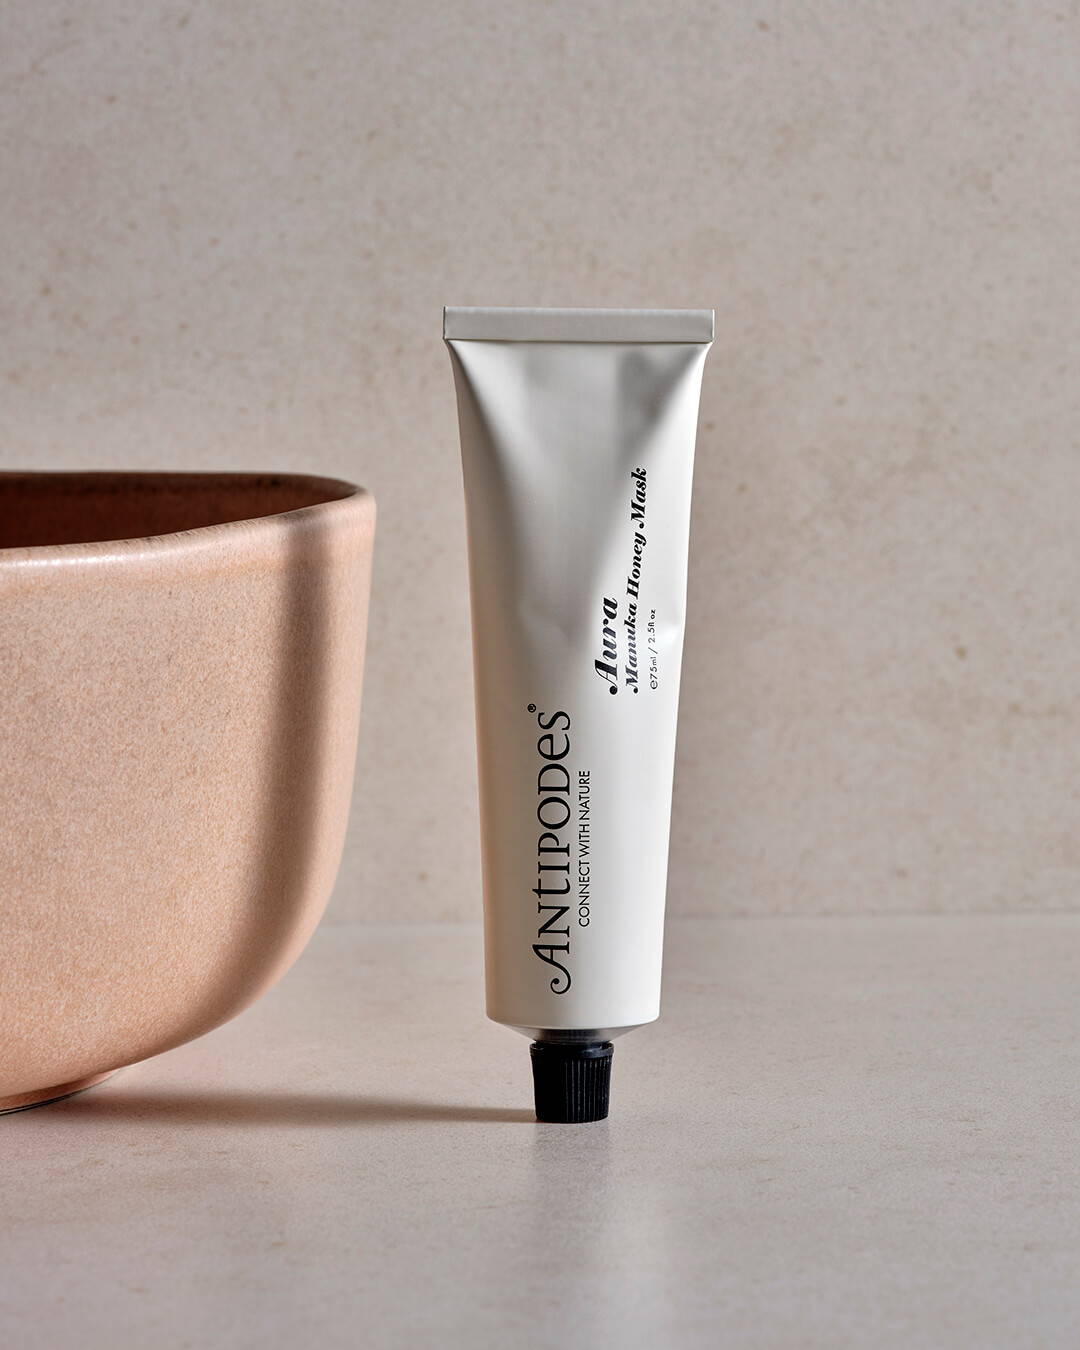 #seo: antipodes anti-imperfections mask